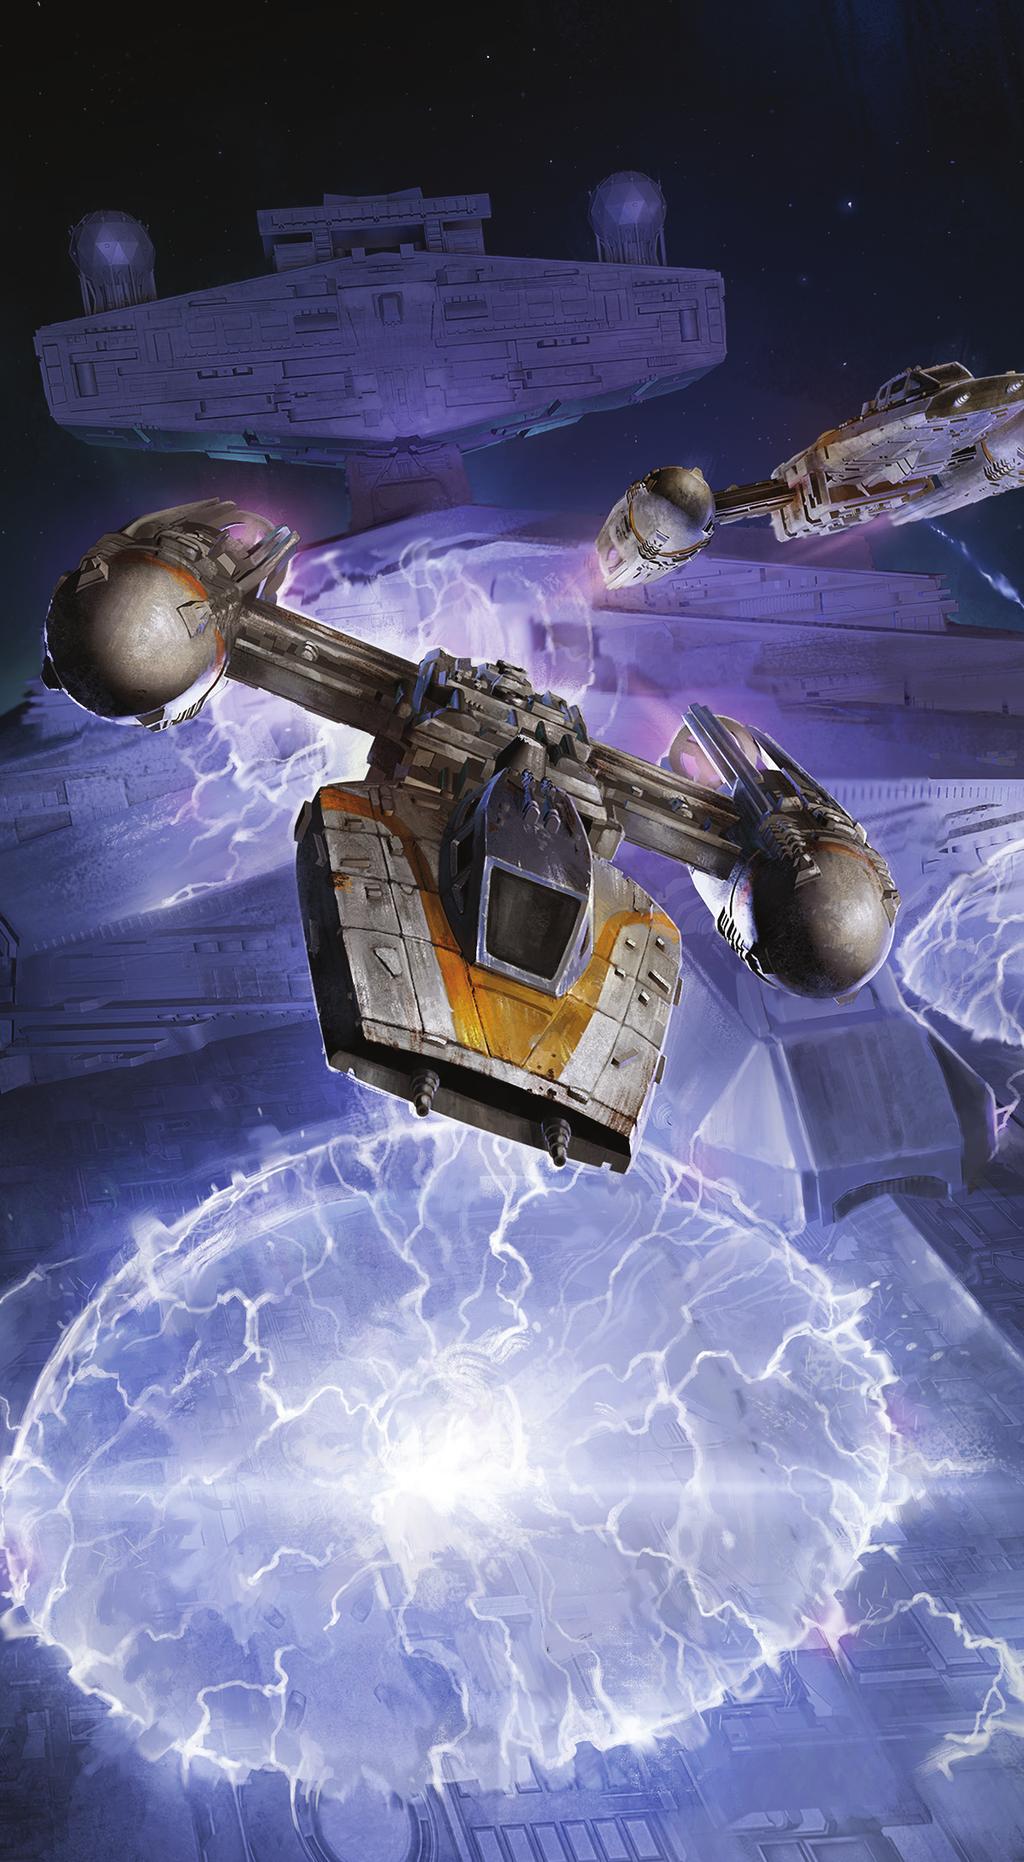 Tournaments supported by the Organized Play ( OP ) program for X-Wing, sponsored by Fantasy Flight Games ( FFG ) and its international partners, follow the rules provided in this document.